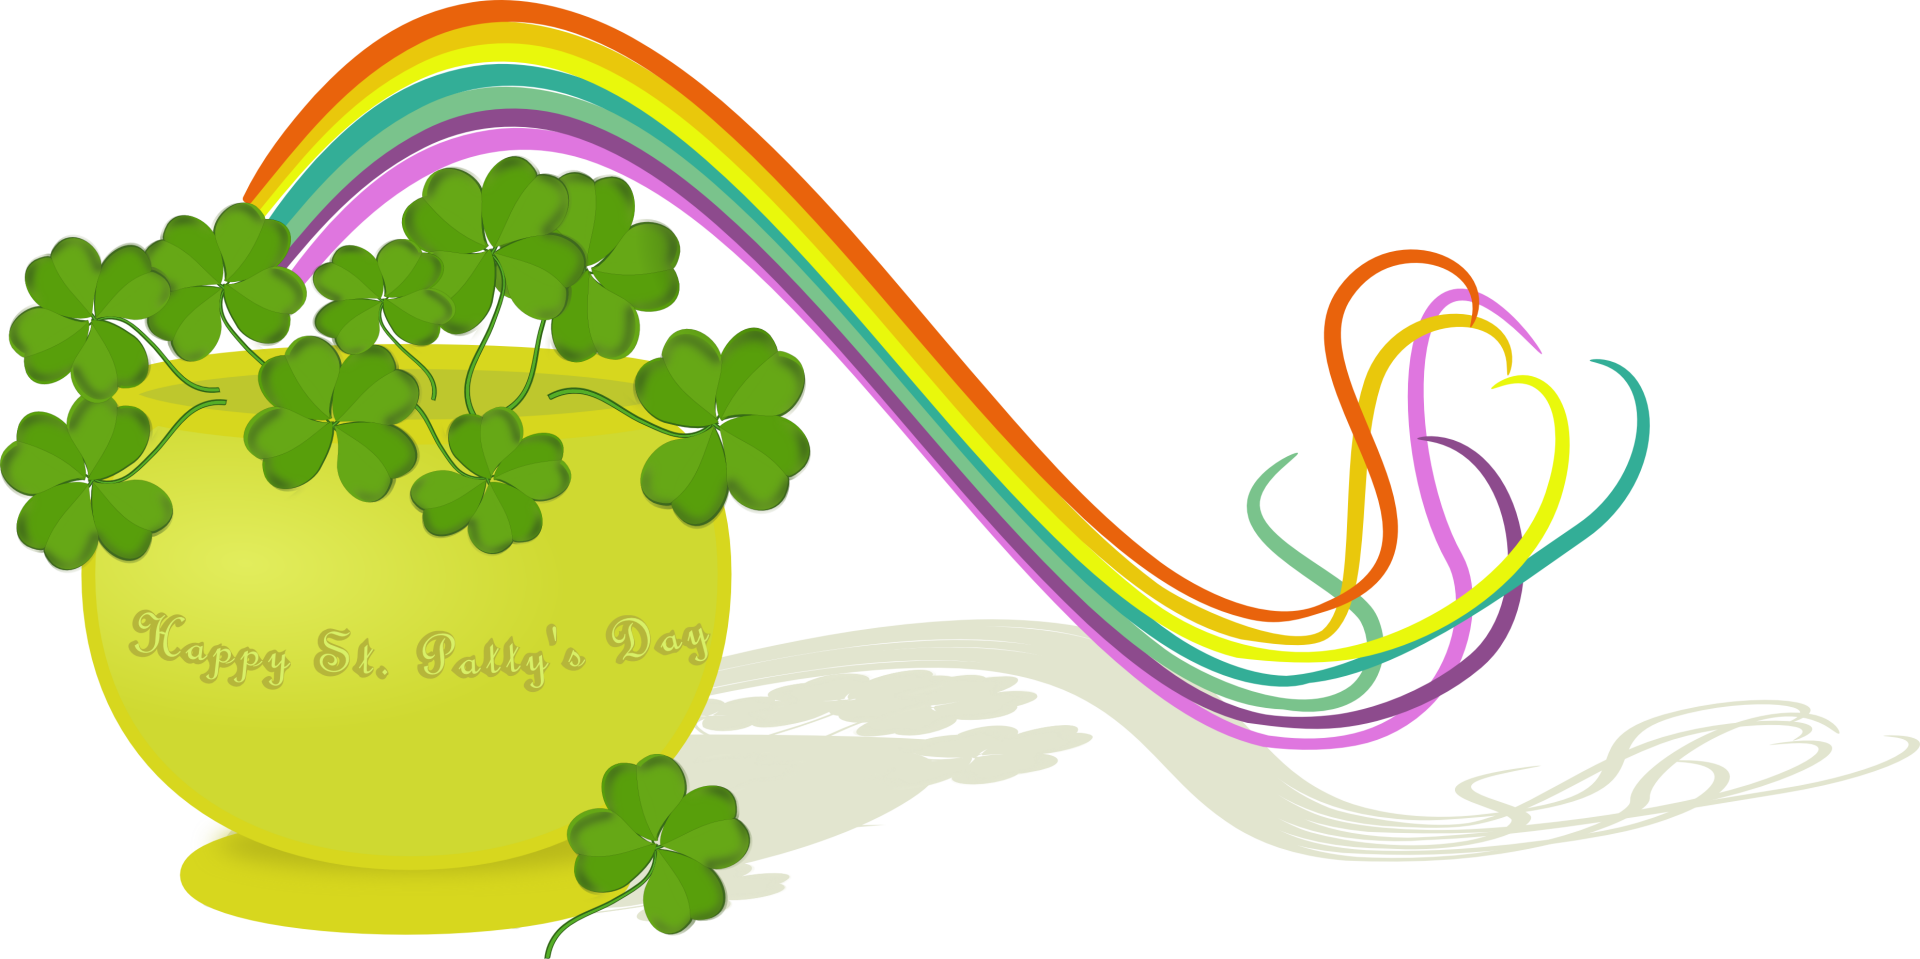 Download Rainbow Clover Holiday St. Patrick's Day  HD Wallpaper